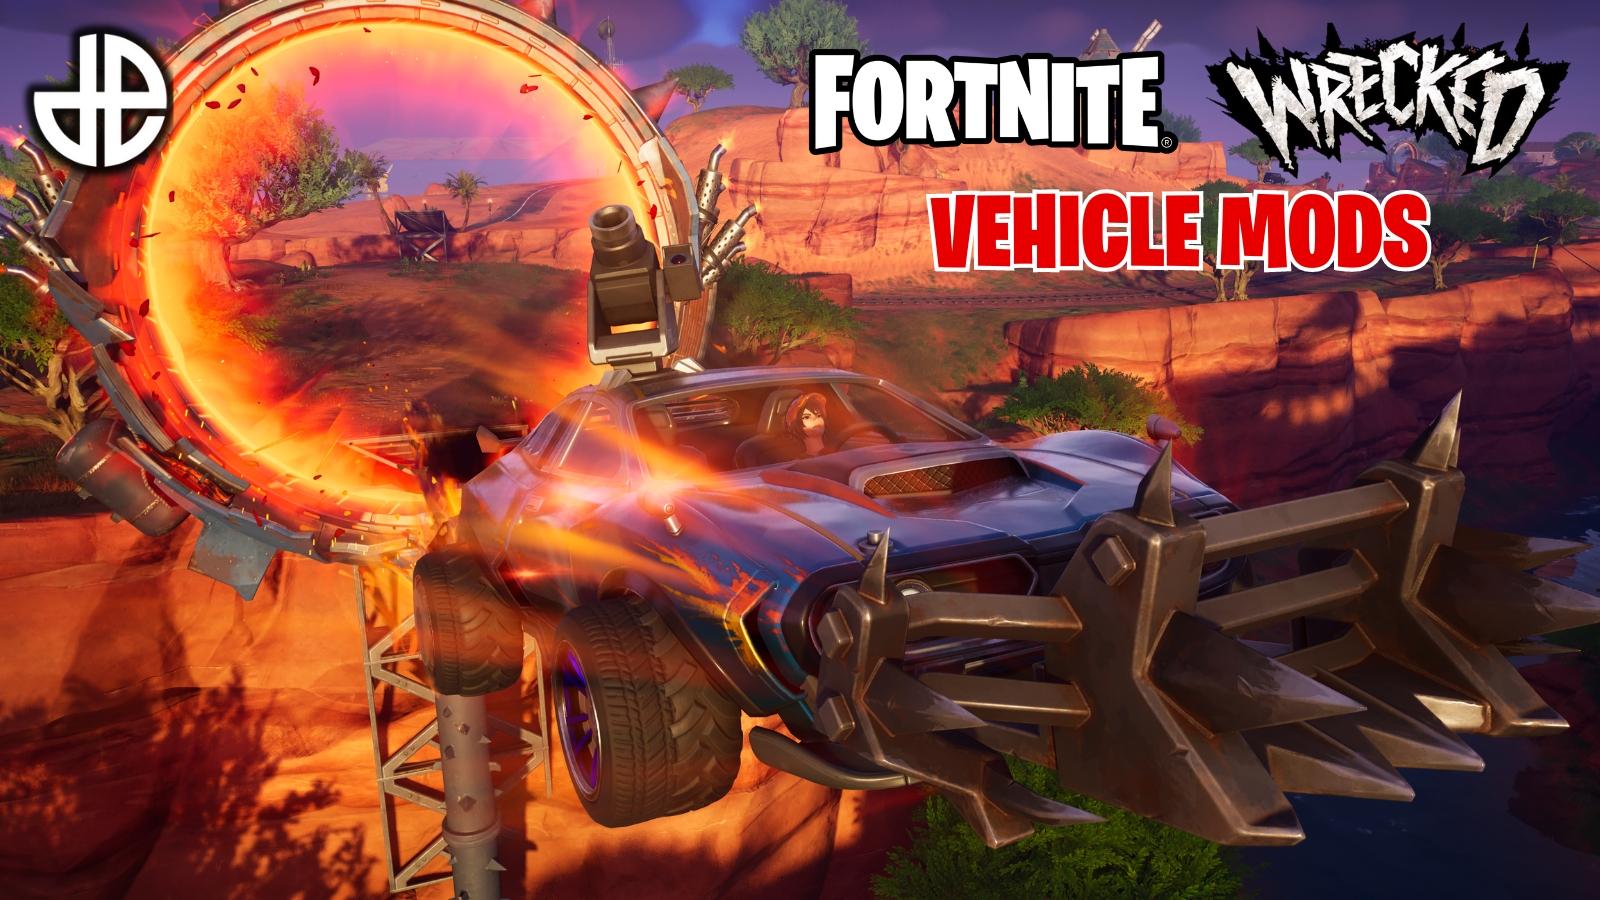 Vehicle Mods cover in Fortnite